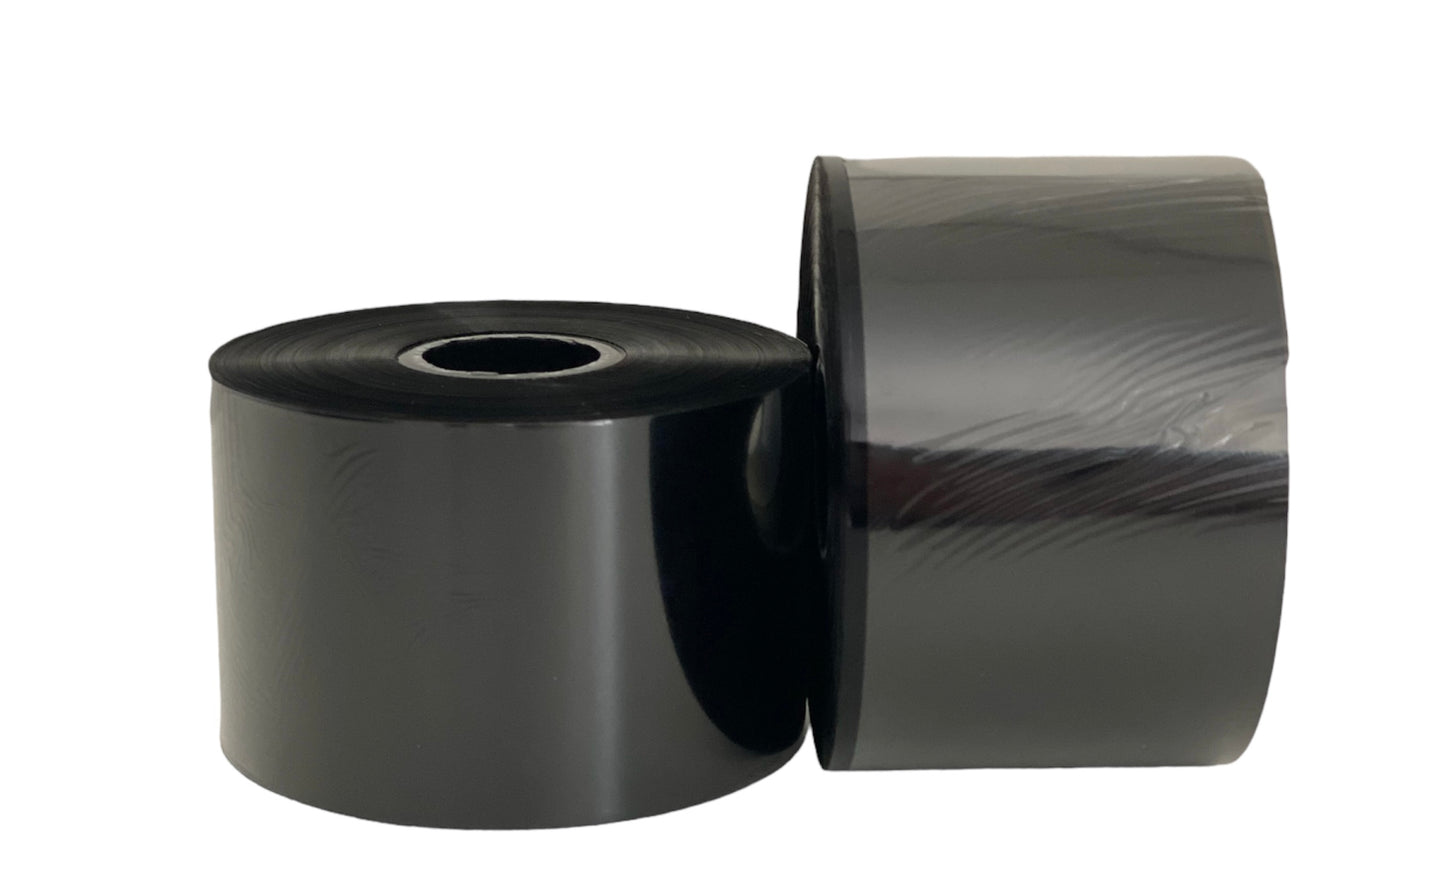 BD Rowa Dose thermal transfer ribbon for Packaging Unit - alternative to Domino